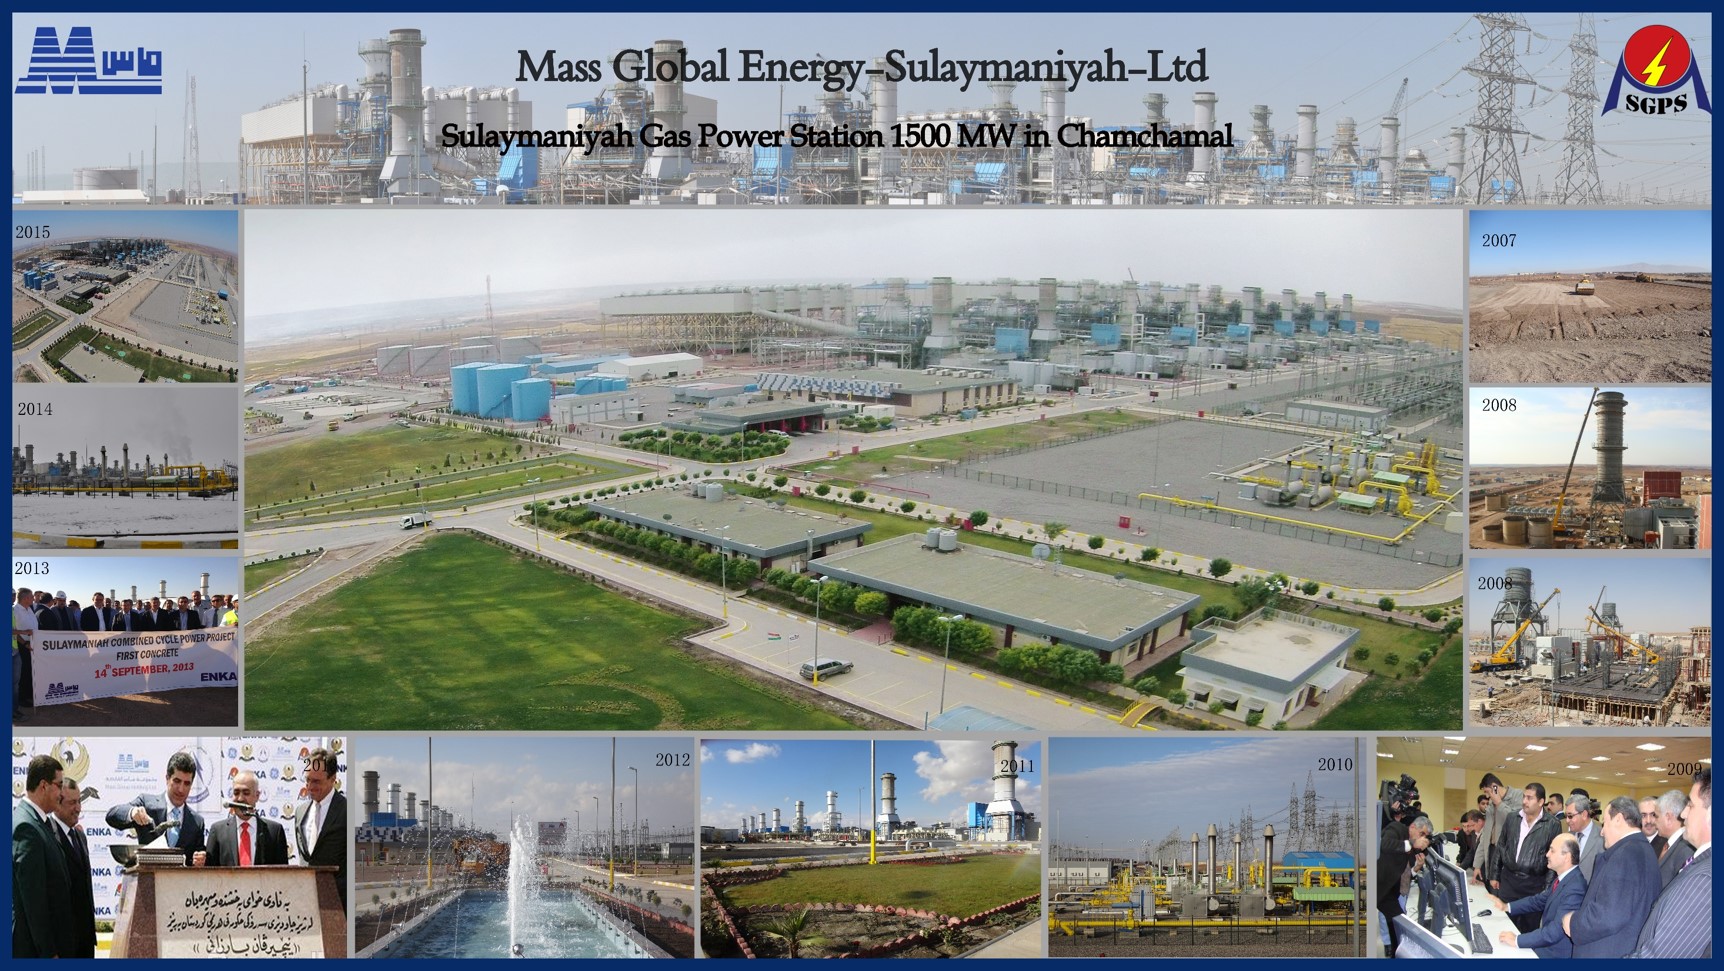 01/10/2017 - Sulaymaniyah Combined Cycle Power Plant Received “Global Project Of The Year 2017” Award by ENR.